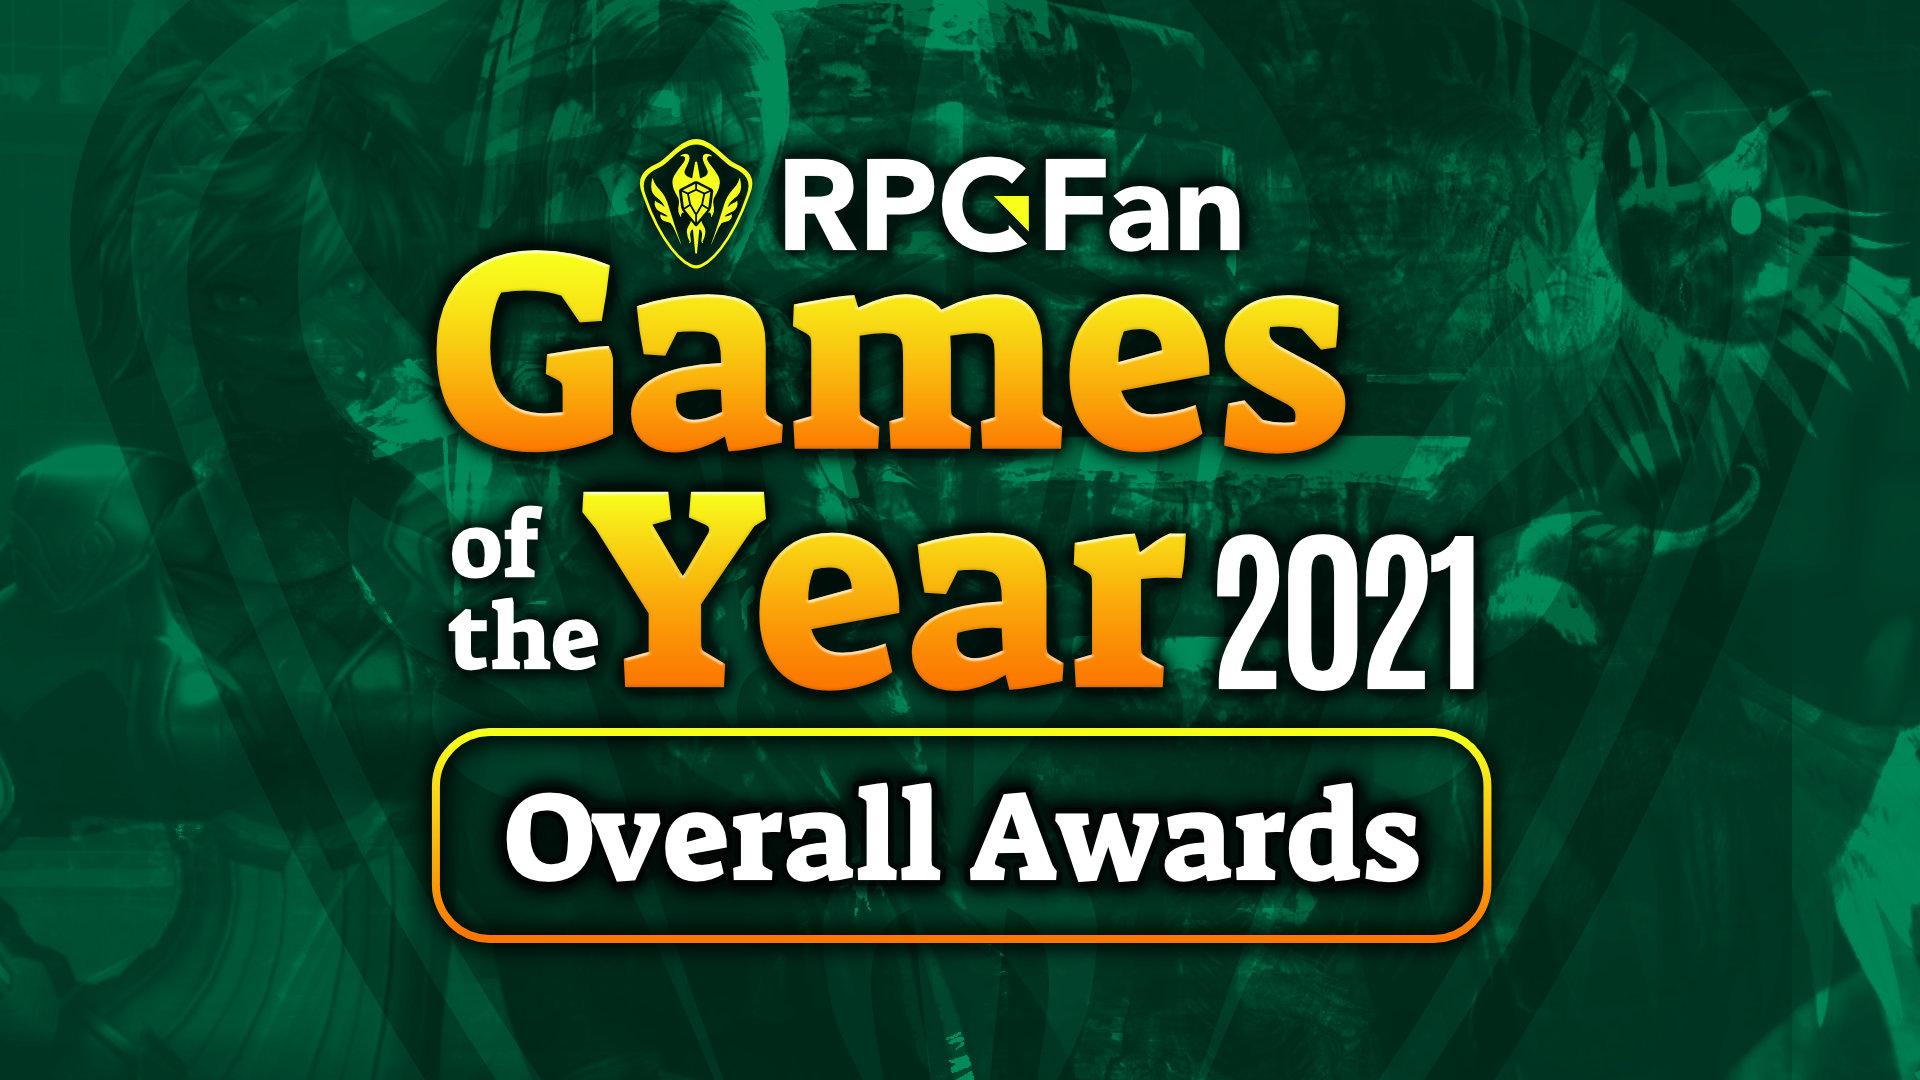 RPGFan Games of the Year 2021 Overall Awards